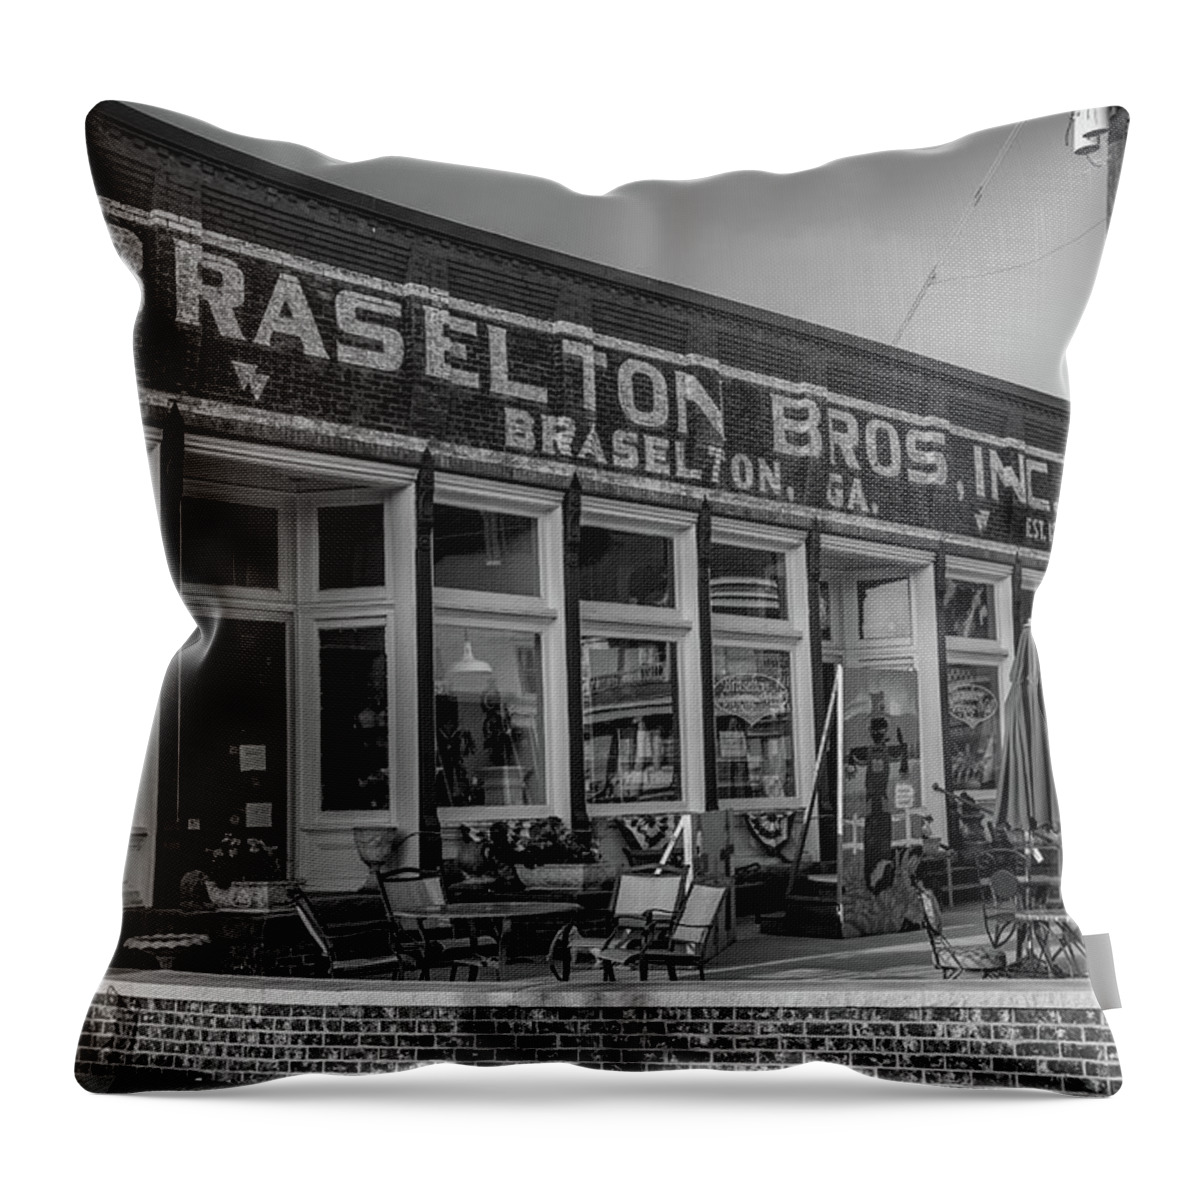 Braselton Throw Pillow featuring the photograph Braselton Bros Inc. Store Front in BW by Doug Camara